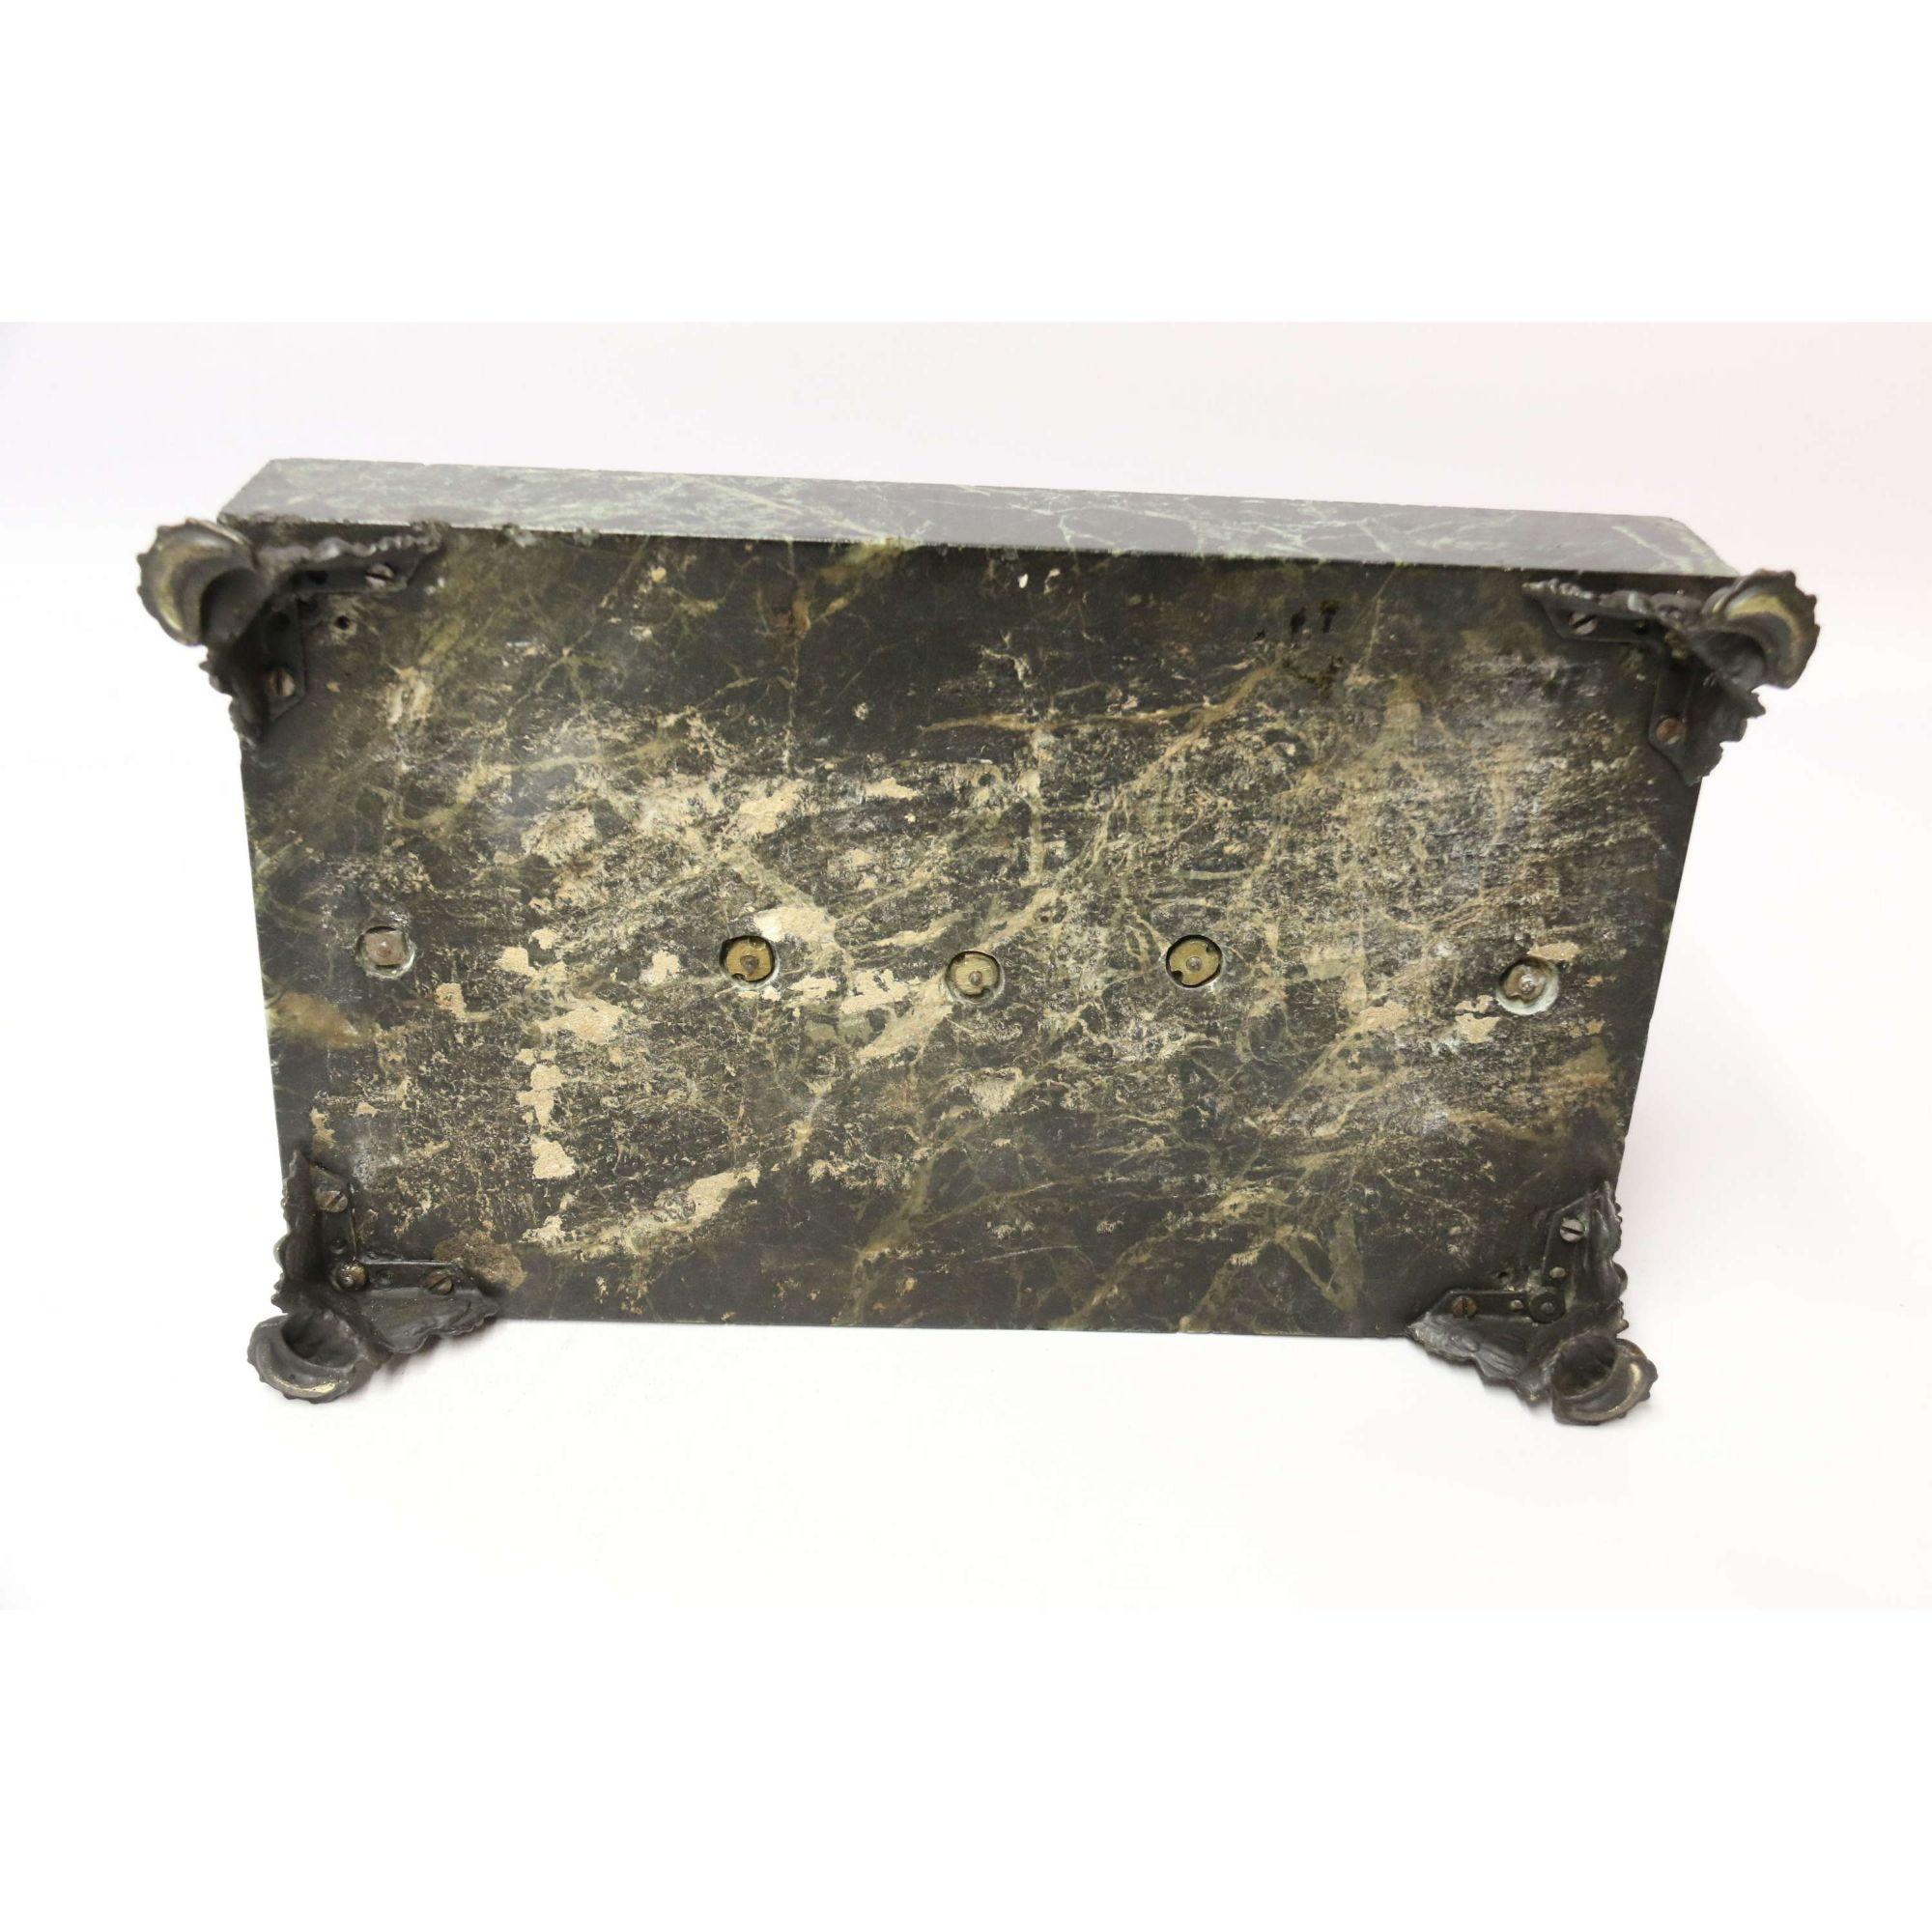 Empire Bronze and Marble Desk Top Inkstand by Lefebvre of Belgium, circa 1820 For Sale 6